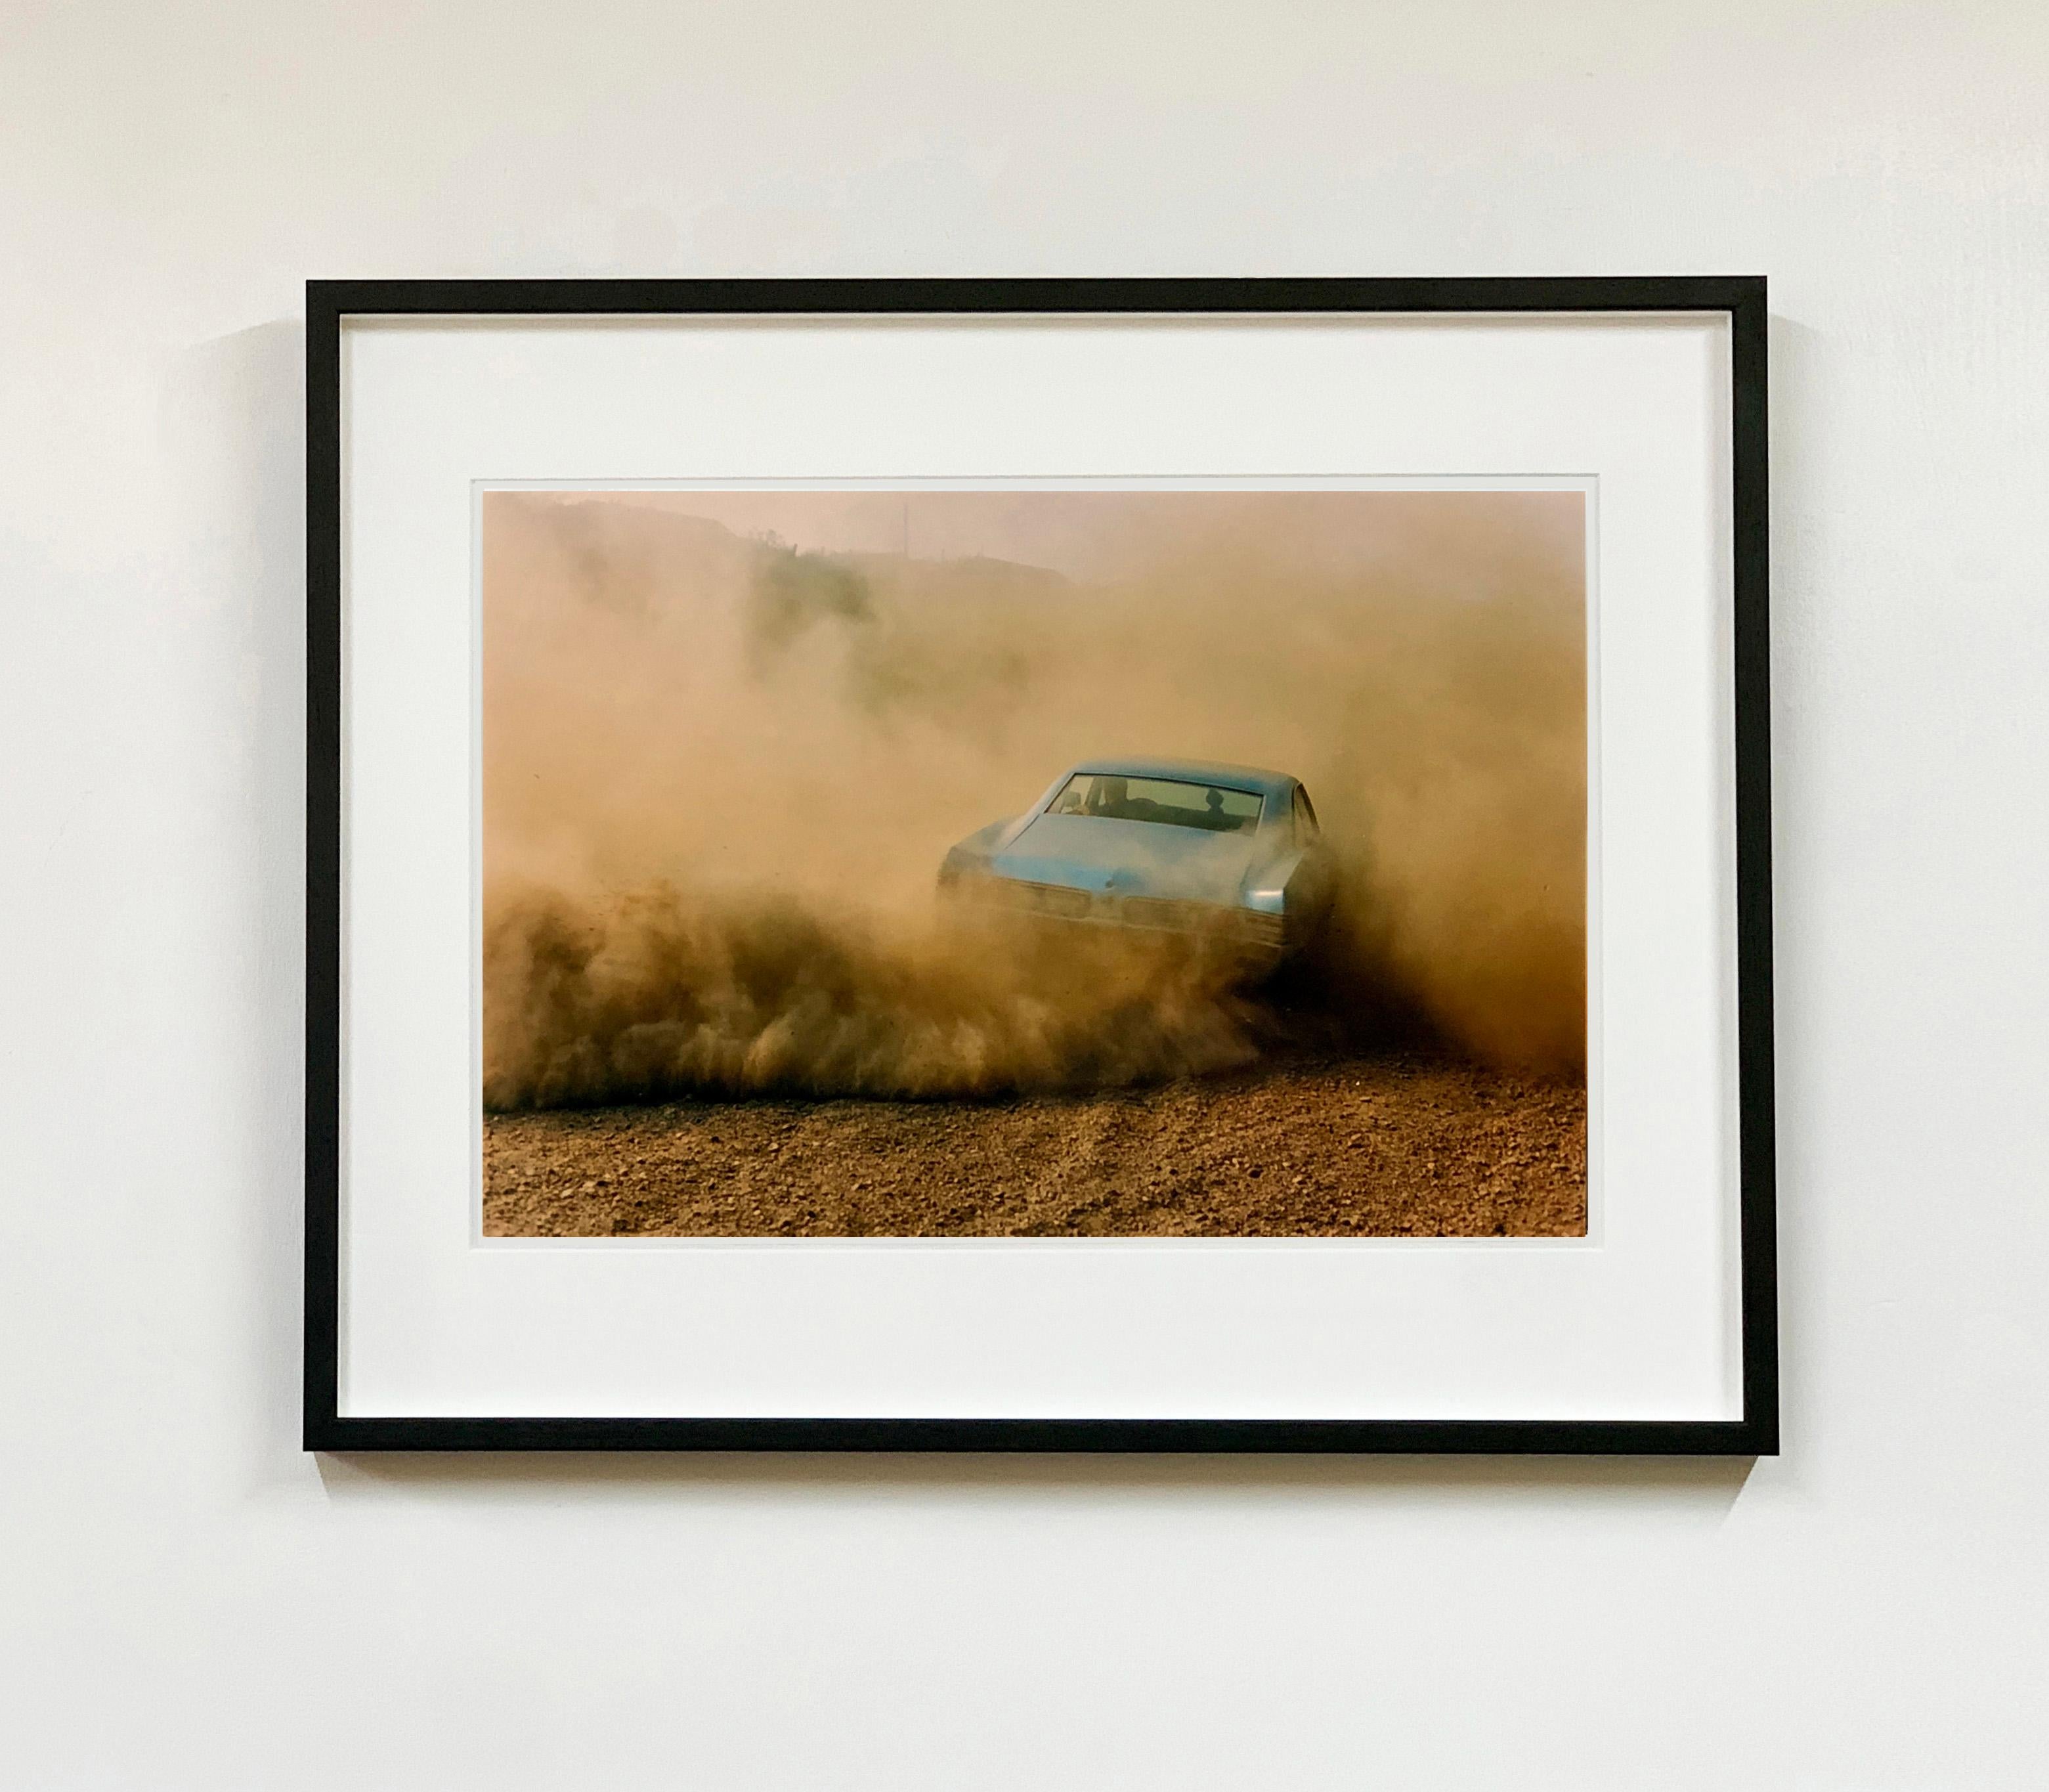 Buick in the Dust, Hemsby, Norfolk - Three Framed Car Color Photographs For Sale 3